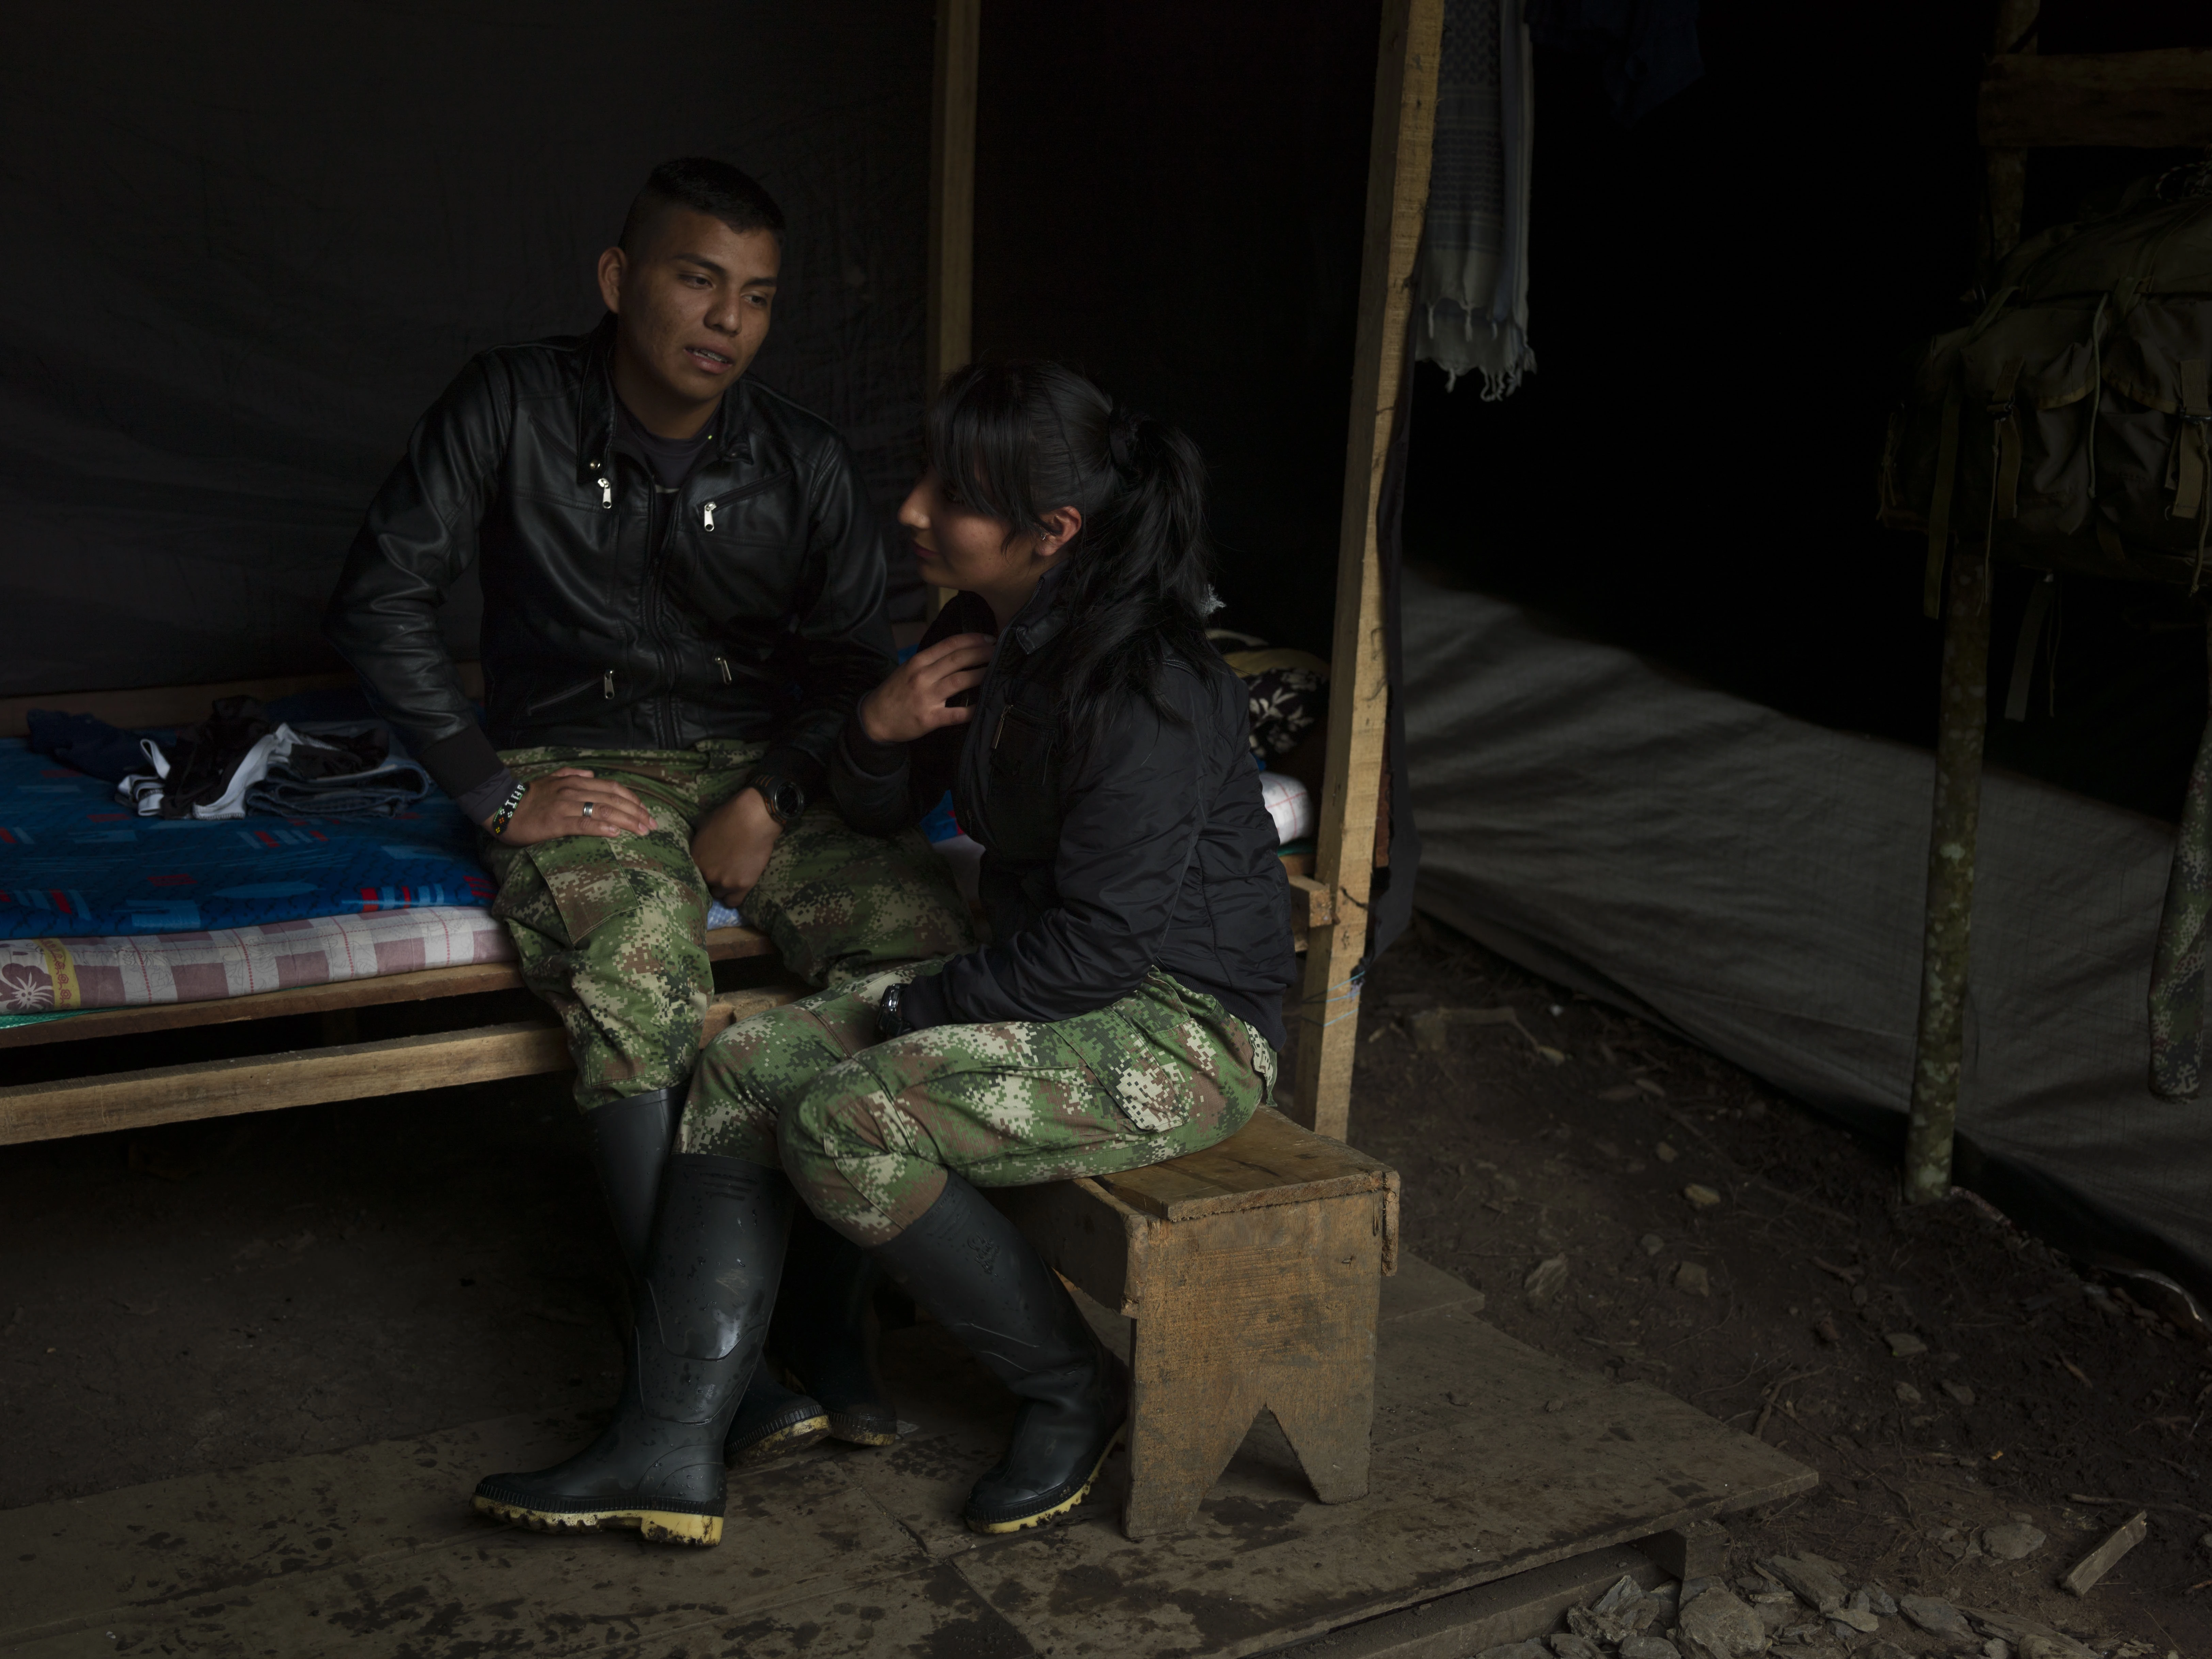 COLOMBIA. 2017. A guerrilla couple in a tent.